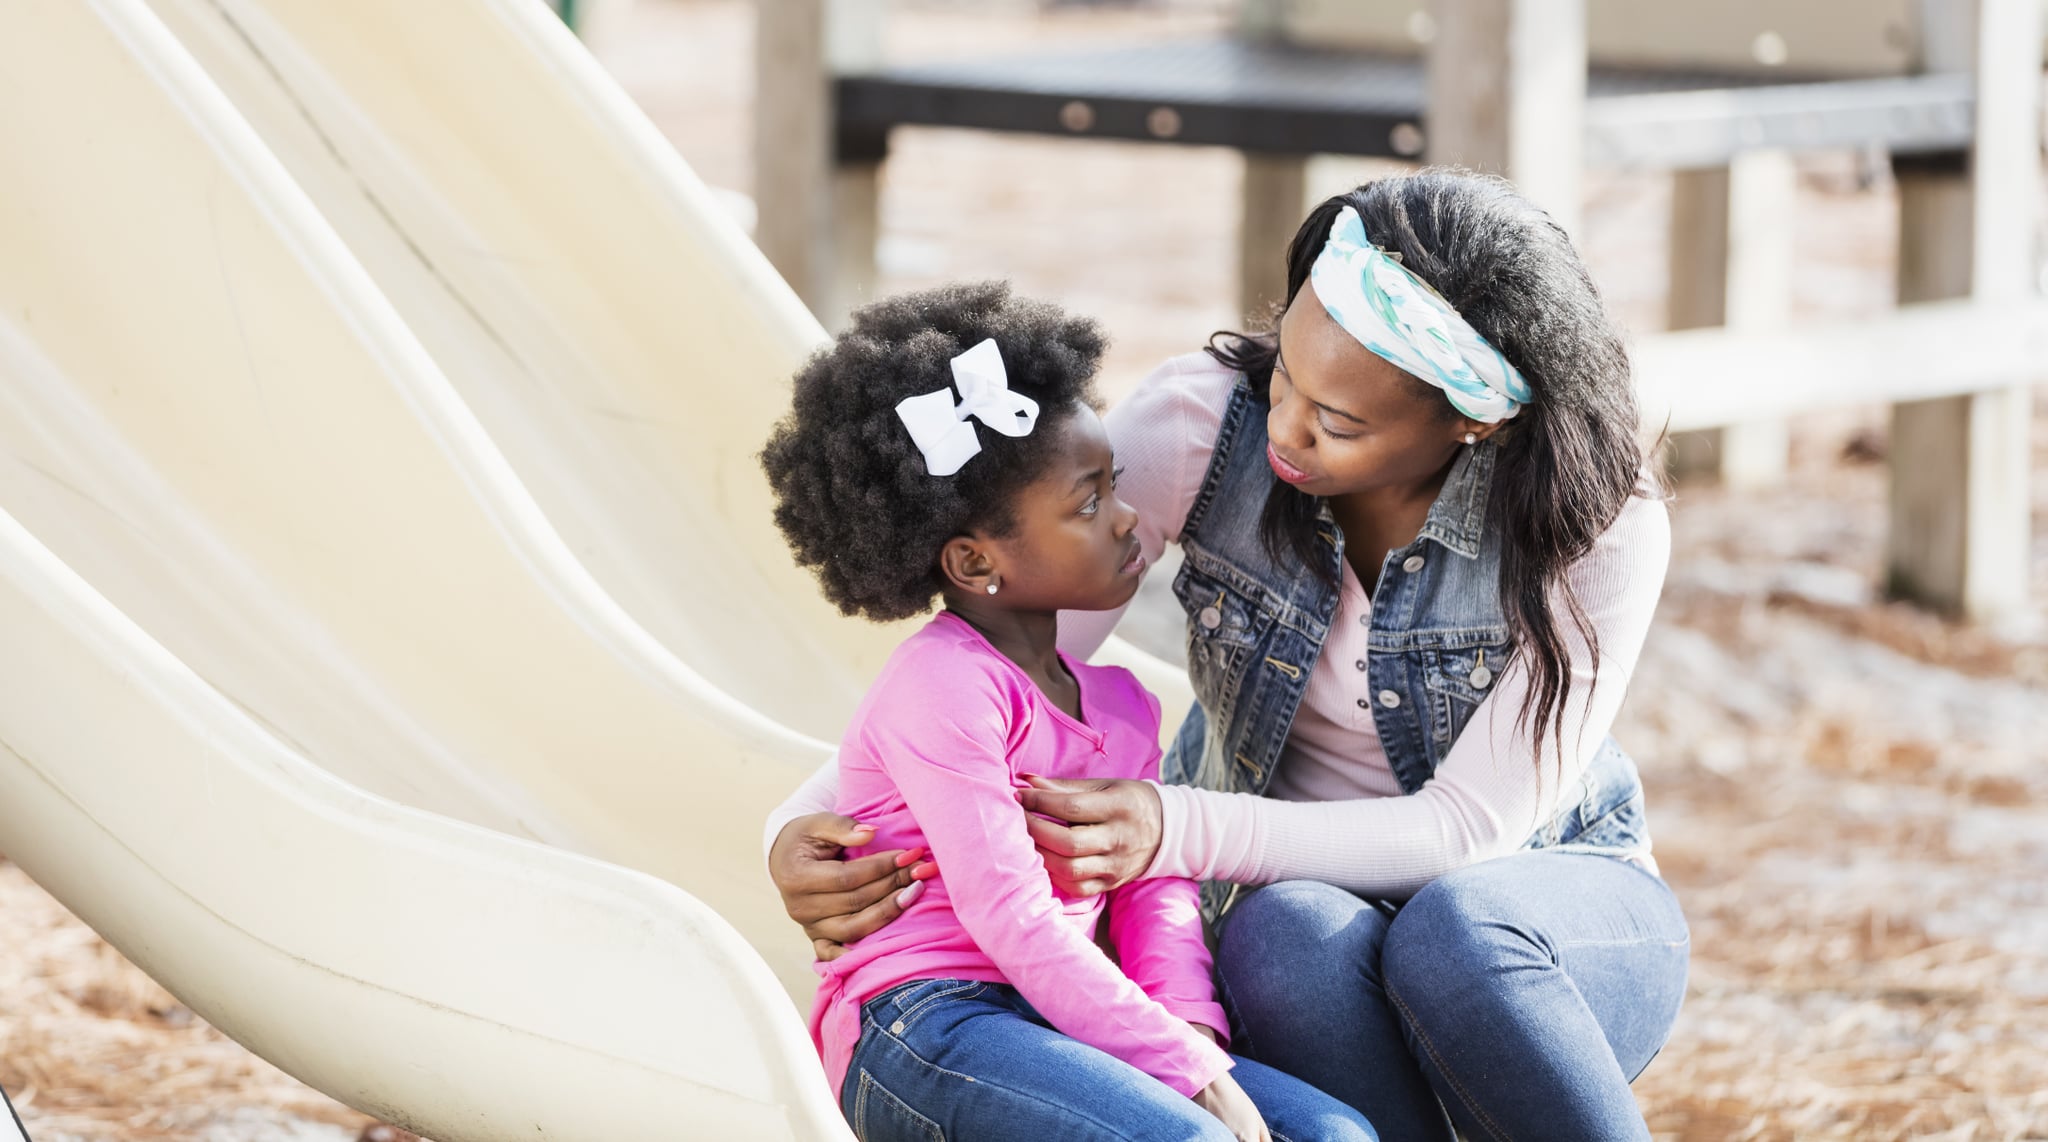 A young African-American woman helping her 5 year old daughter who is sitting on a slide on a playground with a sad expression on her face.